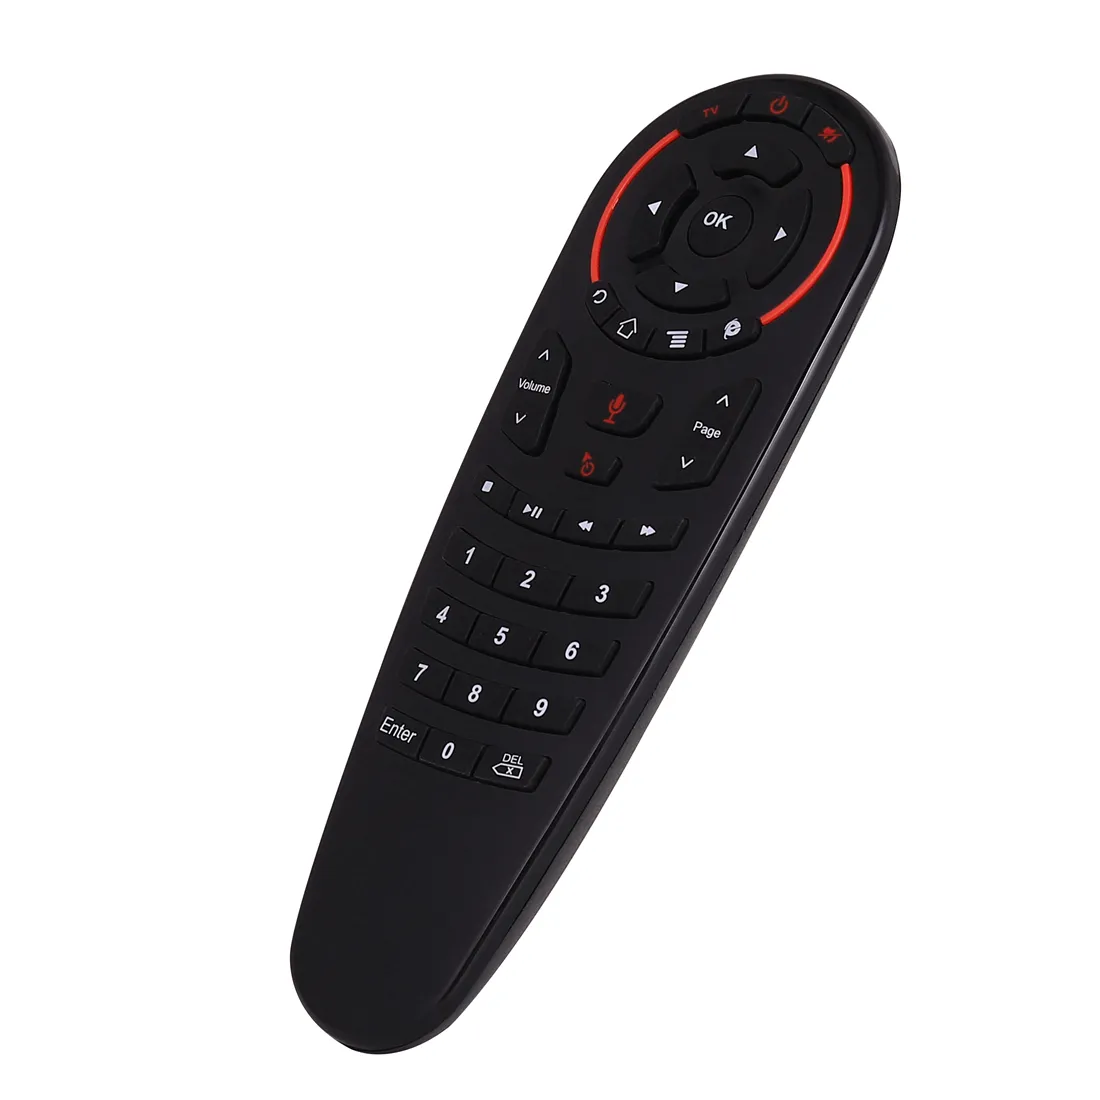 G30S air mouse g30 2.4G gyro remote control 34 keys assistant voice remote for android